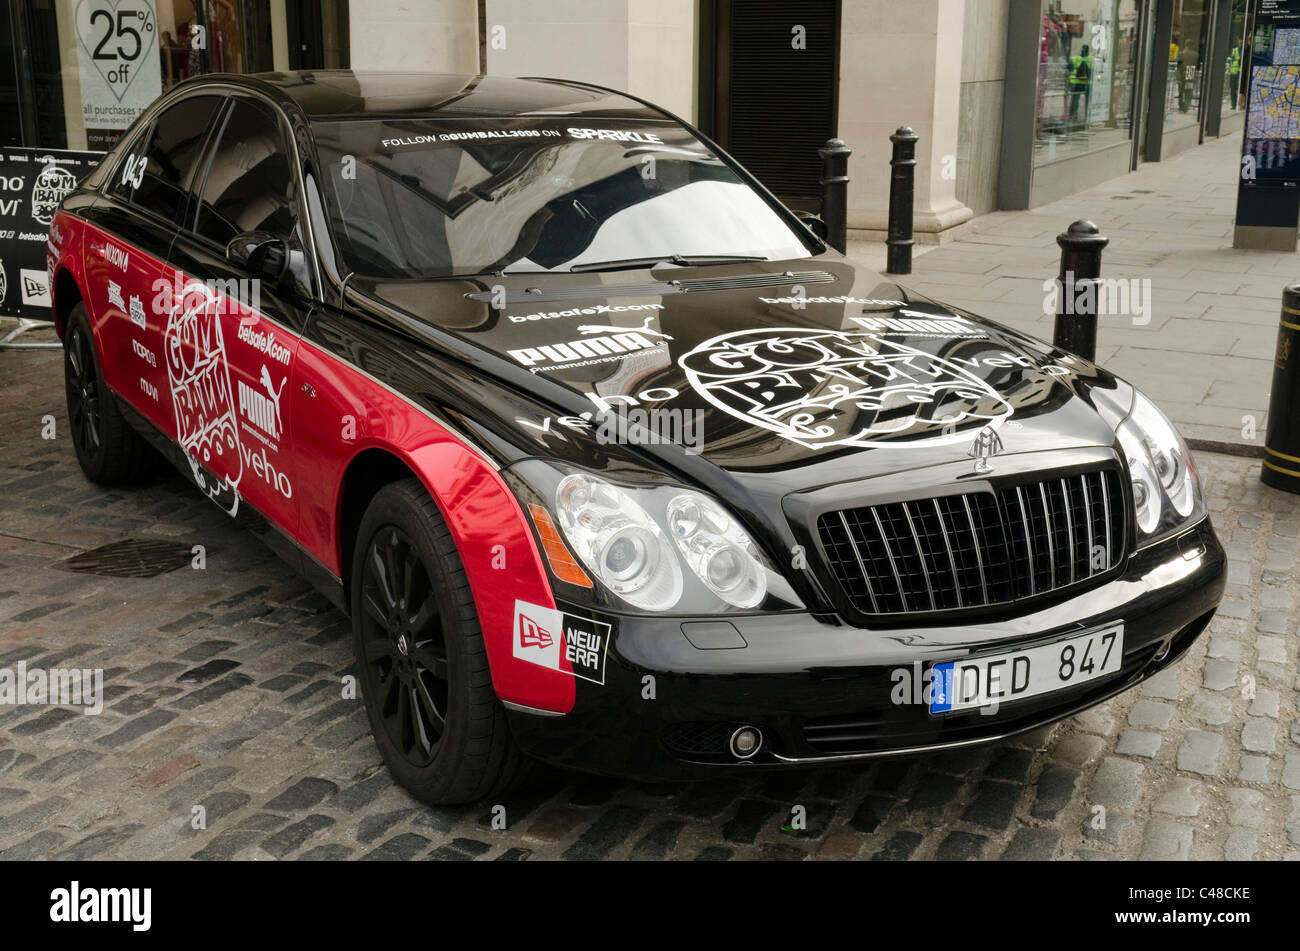 Black and Red Maybach with Gumball 3000 decals, stickers and transfers at the Gumball rally Covent Garden Piazza London Stock Photo